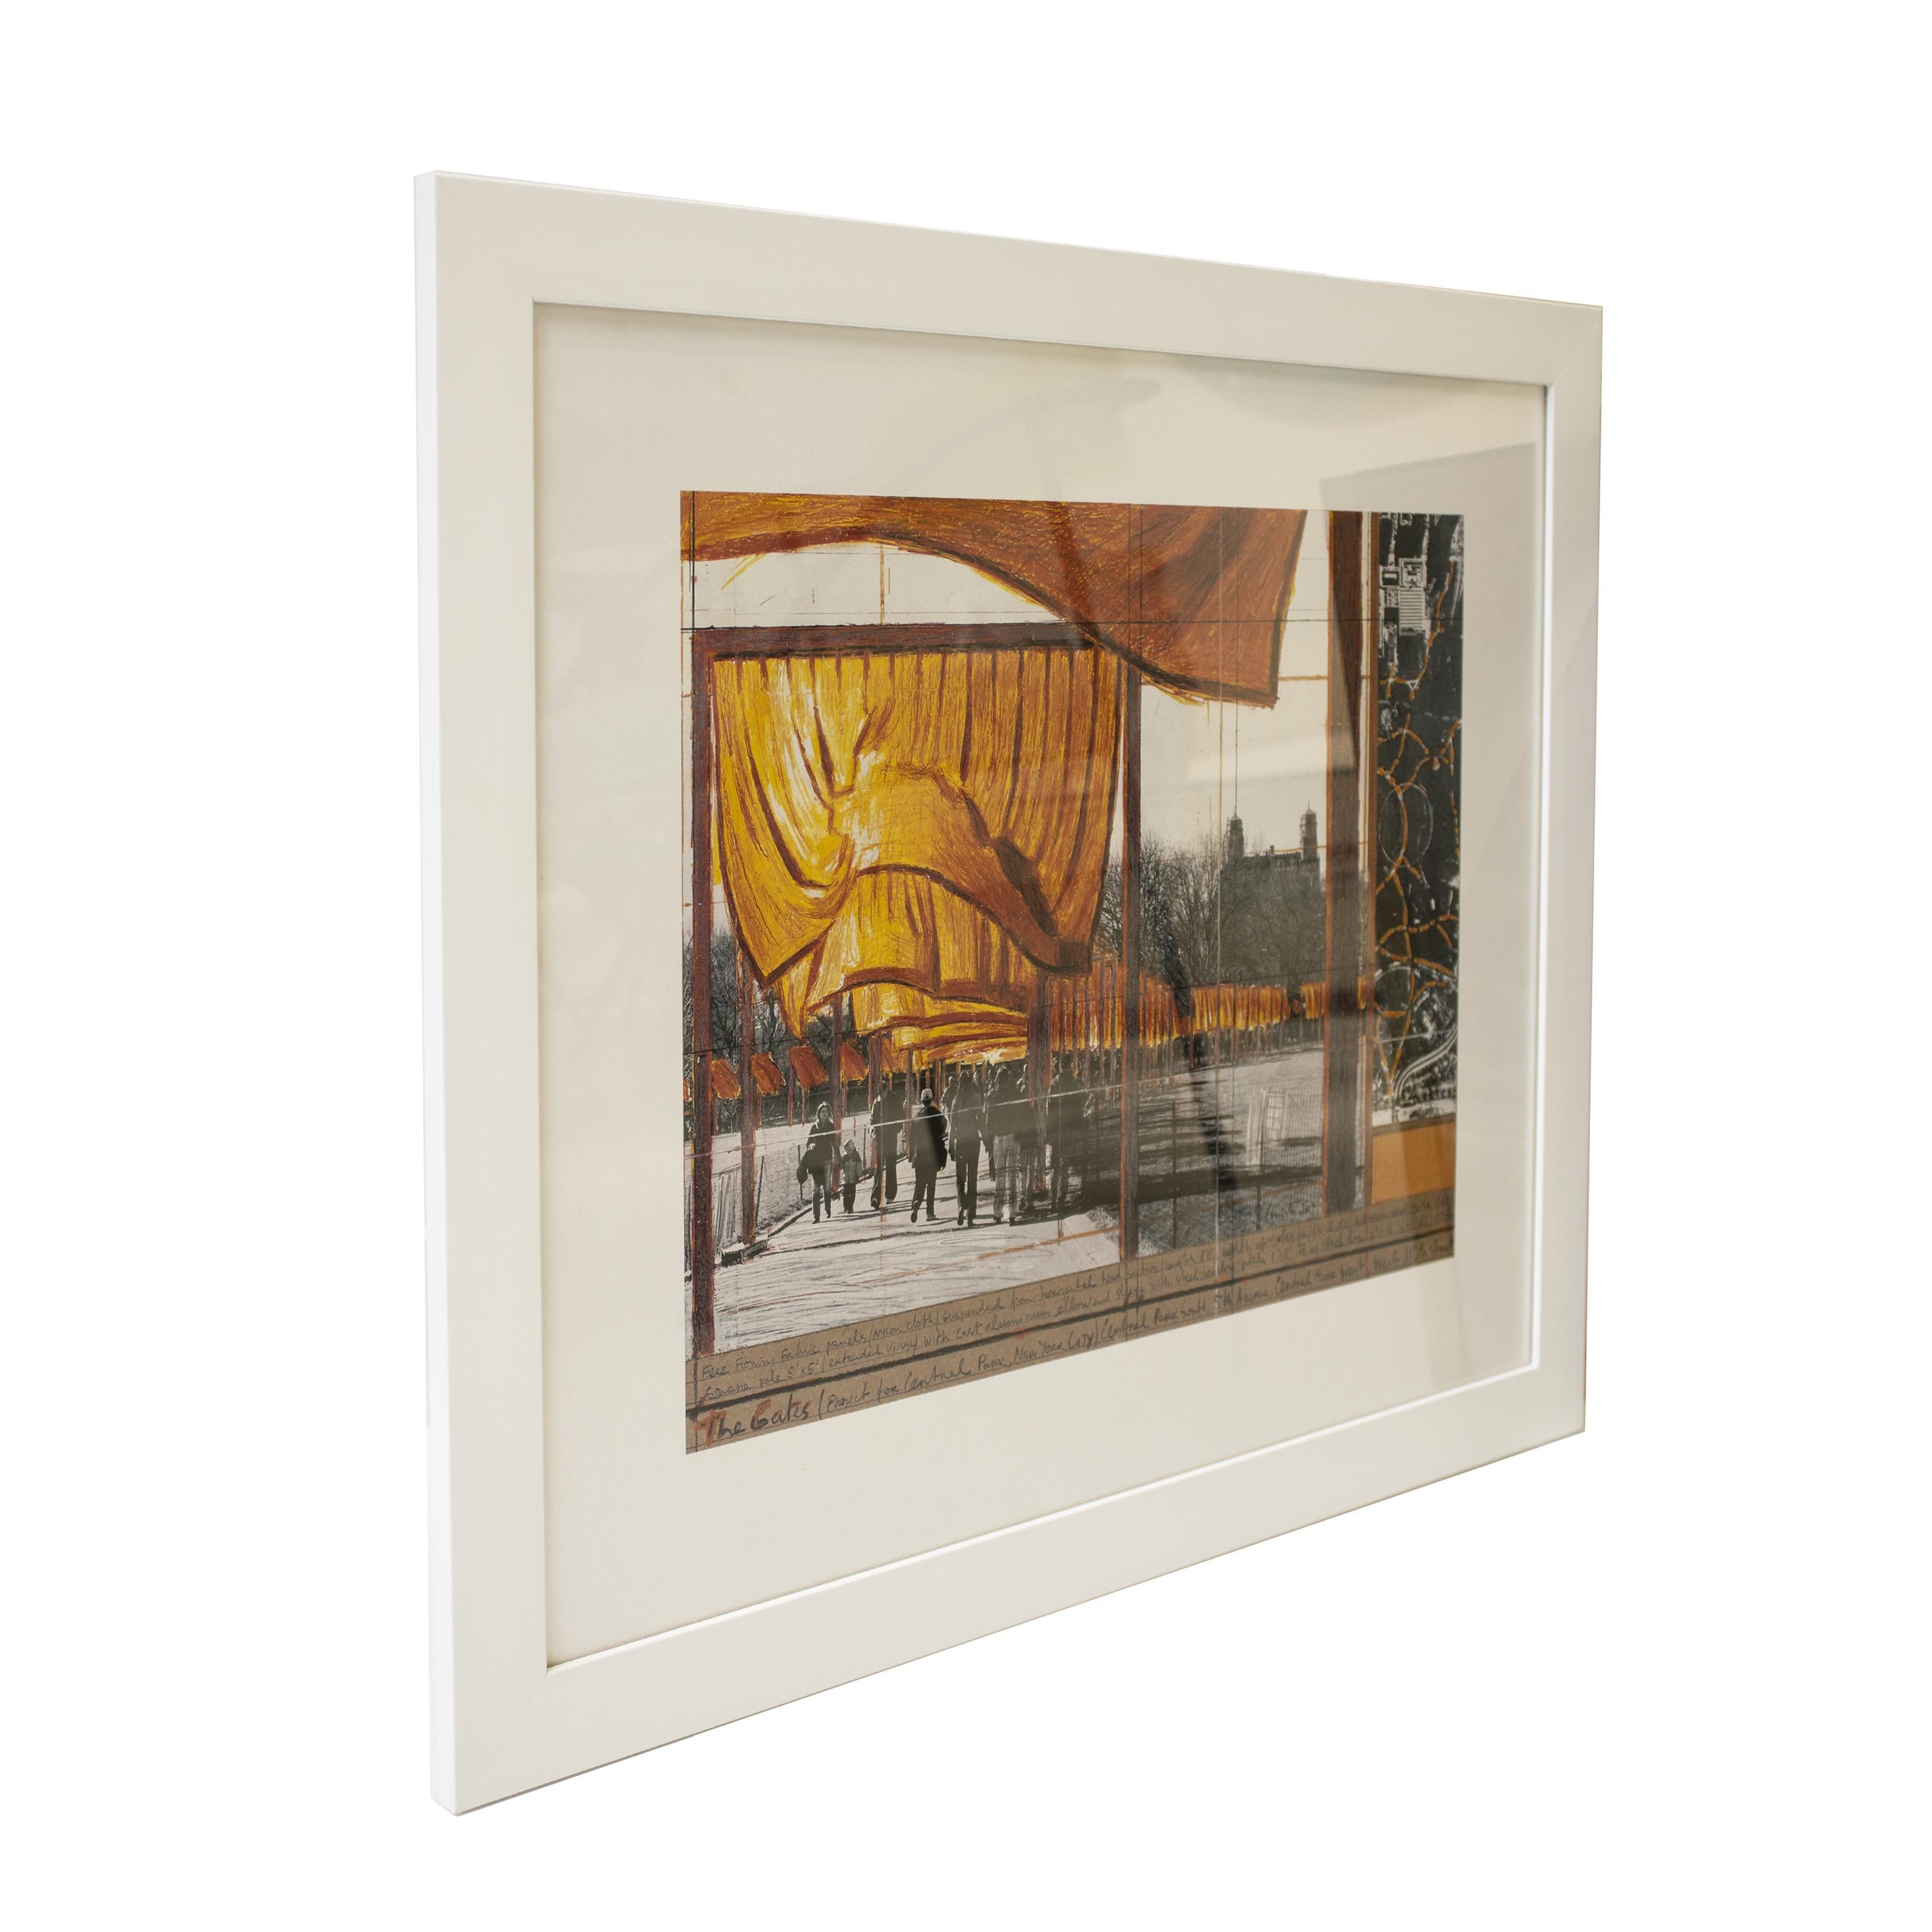 Contemporary lithography in colors from the Project for Central Park, New York City, created in 2004 by Christo and Jeanne-Claude.
The print is framed in a white wooden frame with a transparent glass front.

The installation in Central Park was